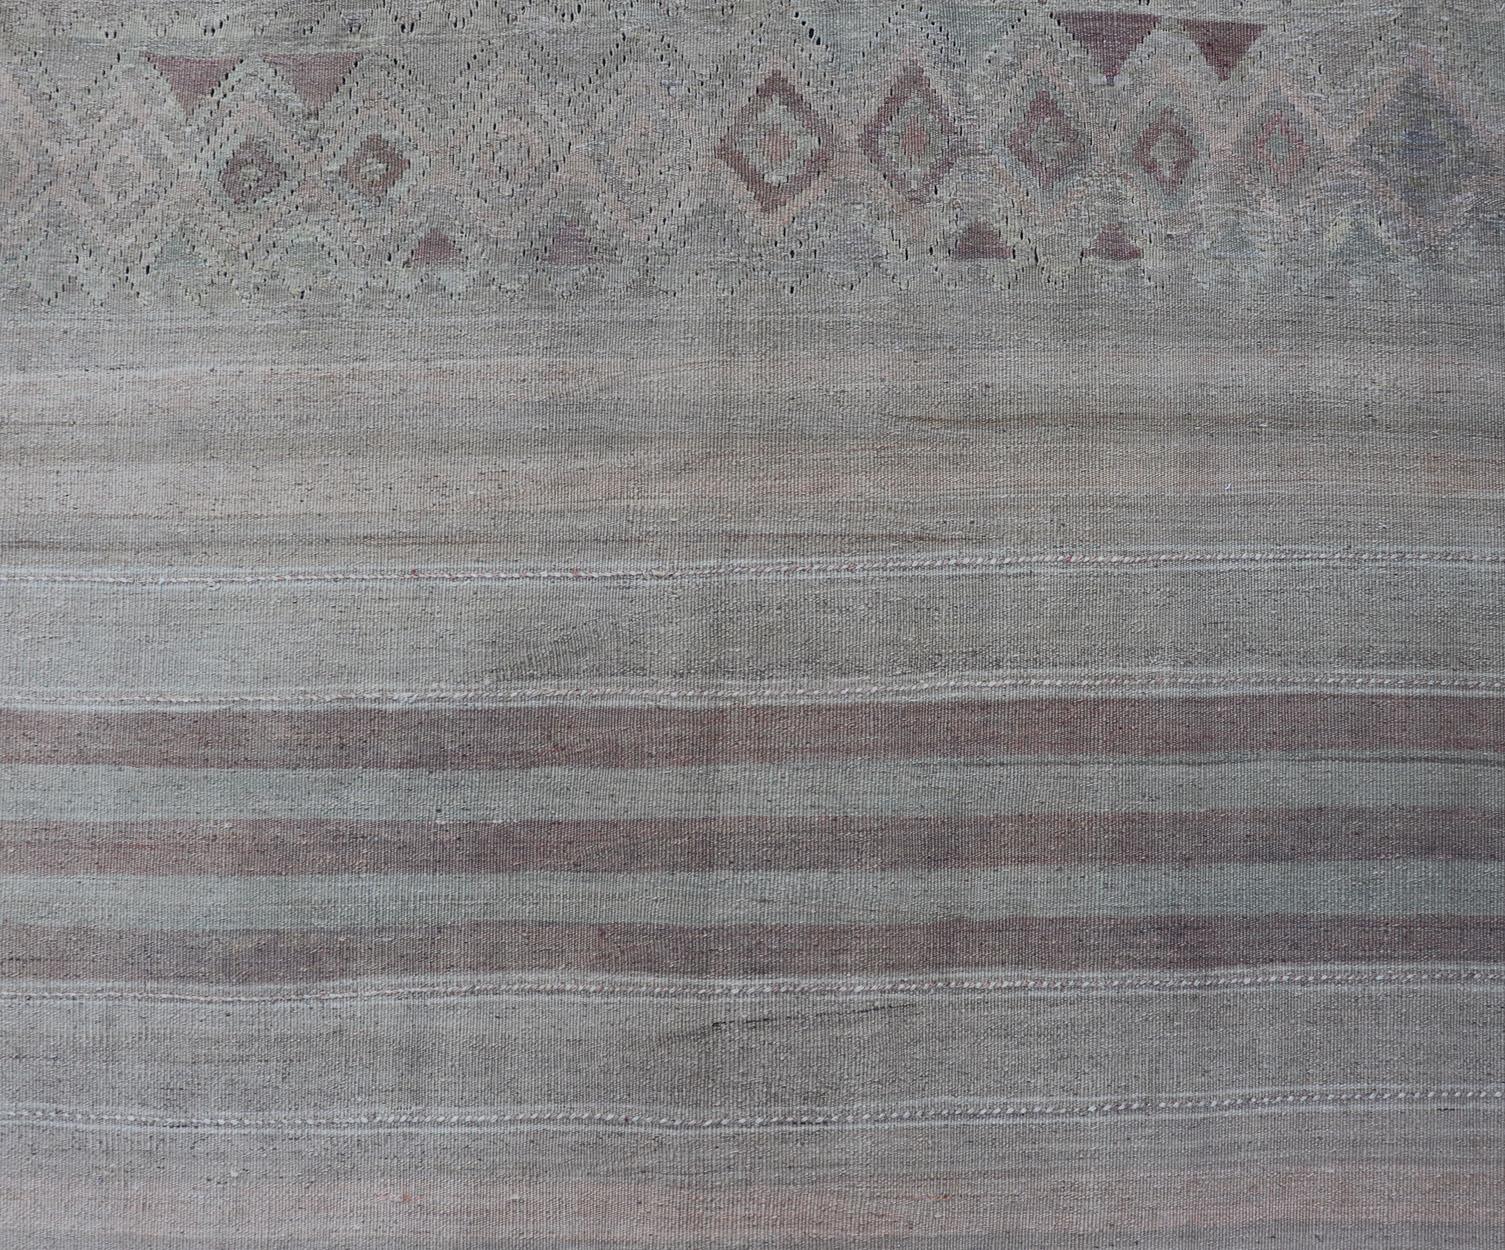  Vintage Turkish Gallery Kilim Runner with Creams, Soft Coral and Light Brown For Sale 4